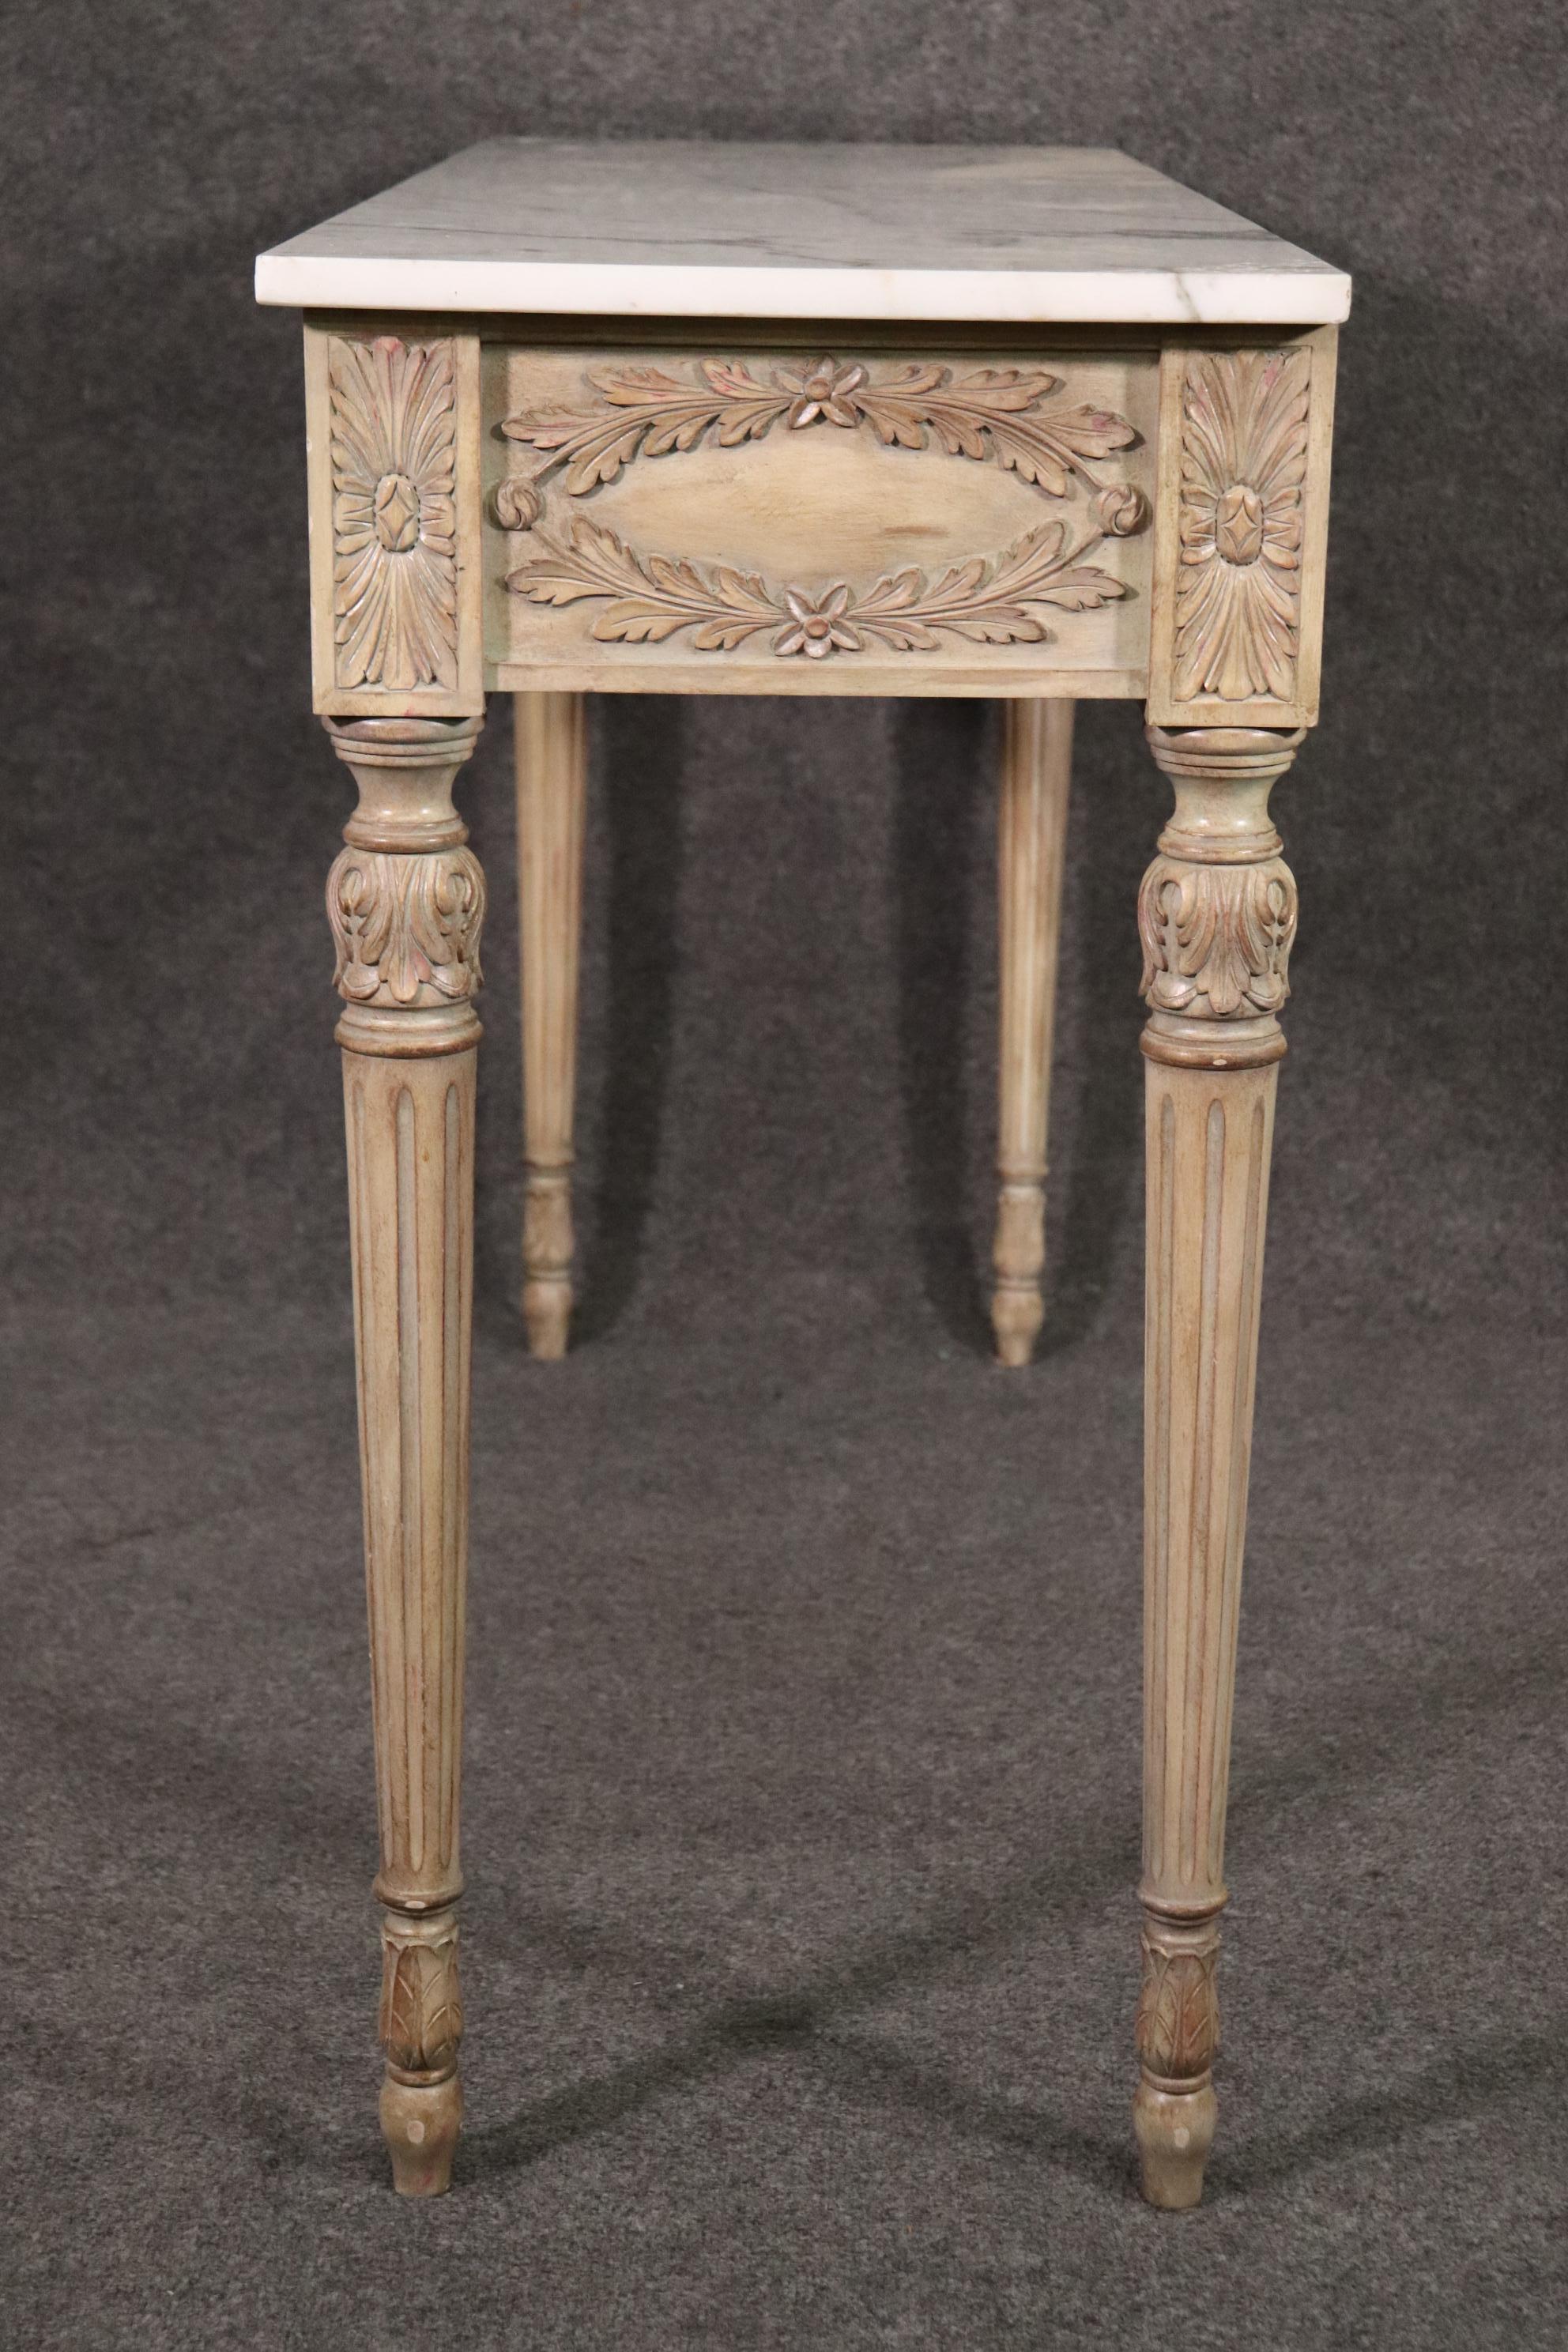 Early 20th Century Fine French Louis XVI Marble Top Console Table with Glazed Finish circa 1920s